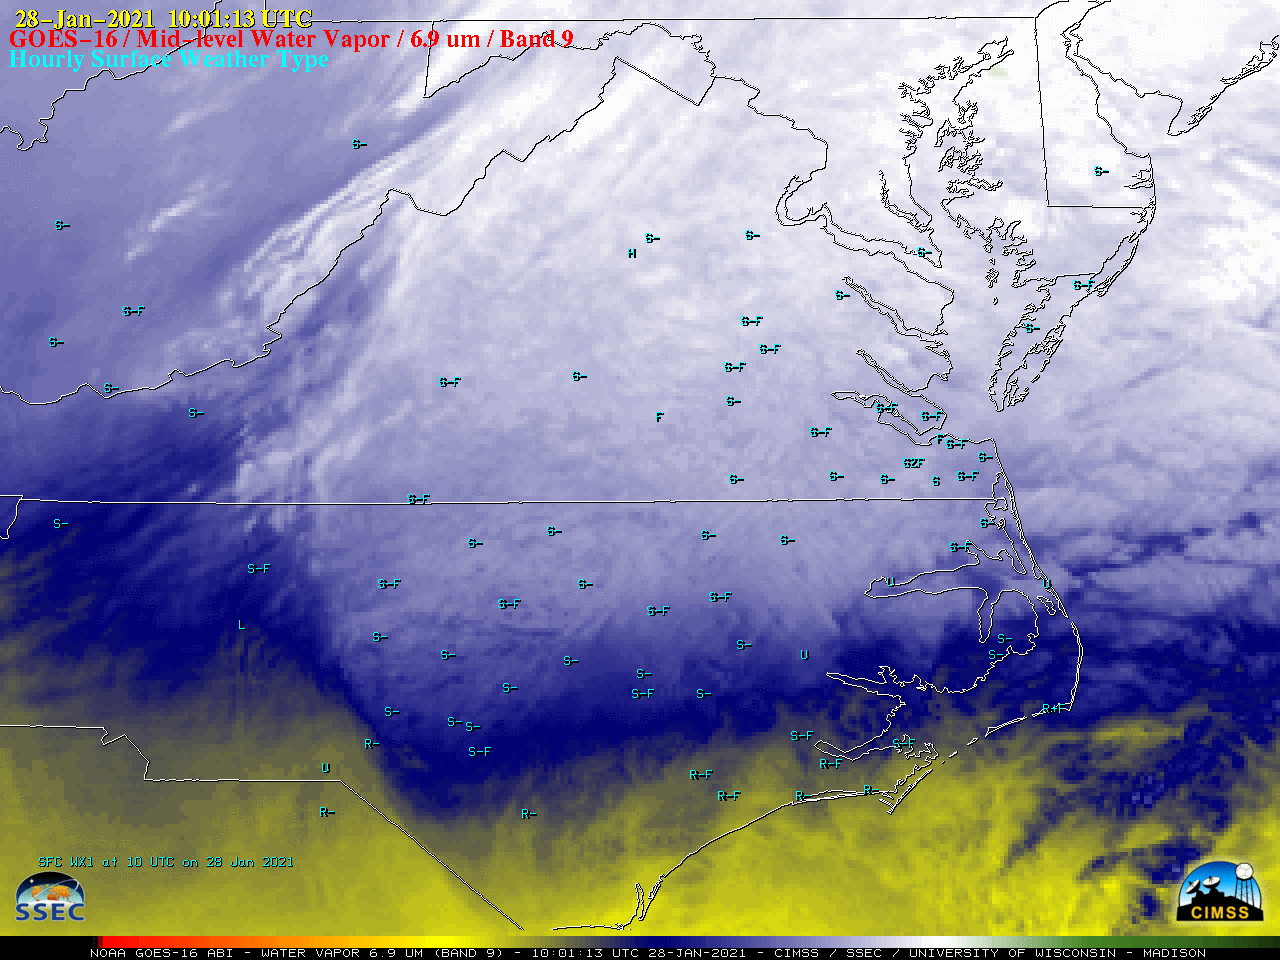 GOES-16 Mid-level Water Vapor (6.9 µm) images, with plots of hourly surface weather type [click to play animation | MP4]